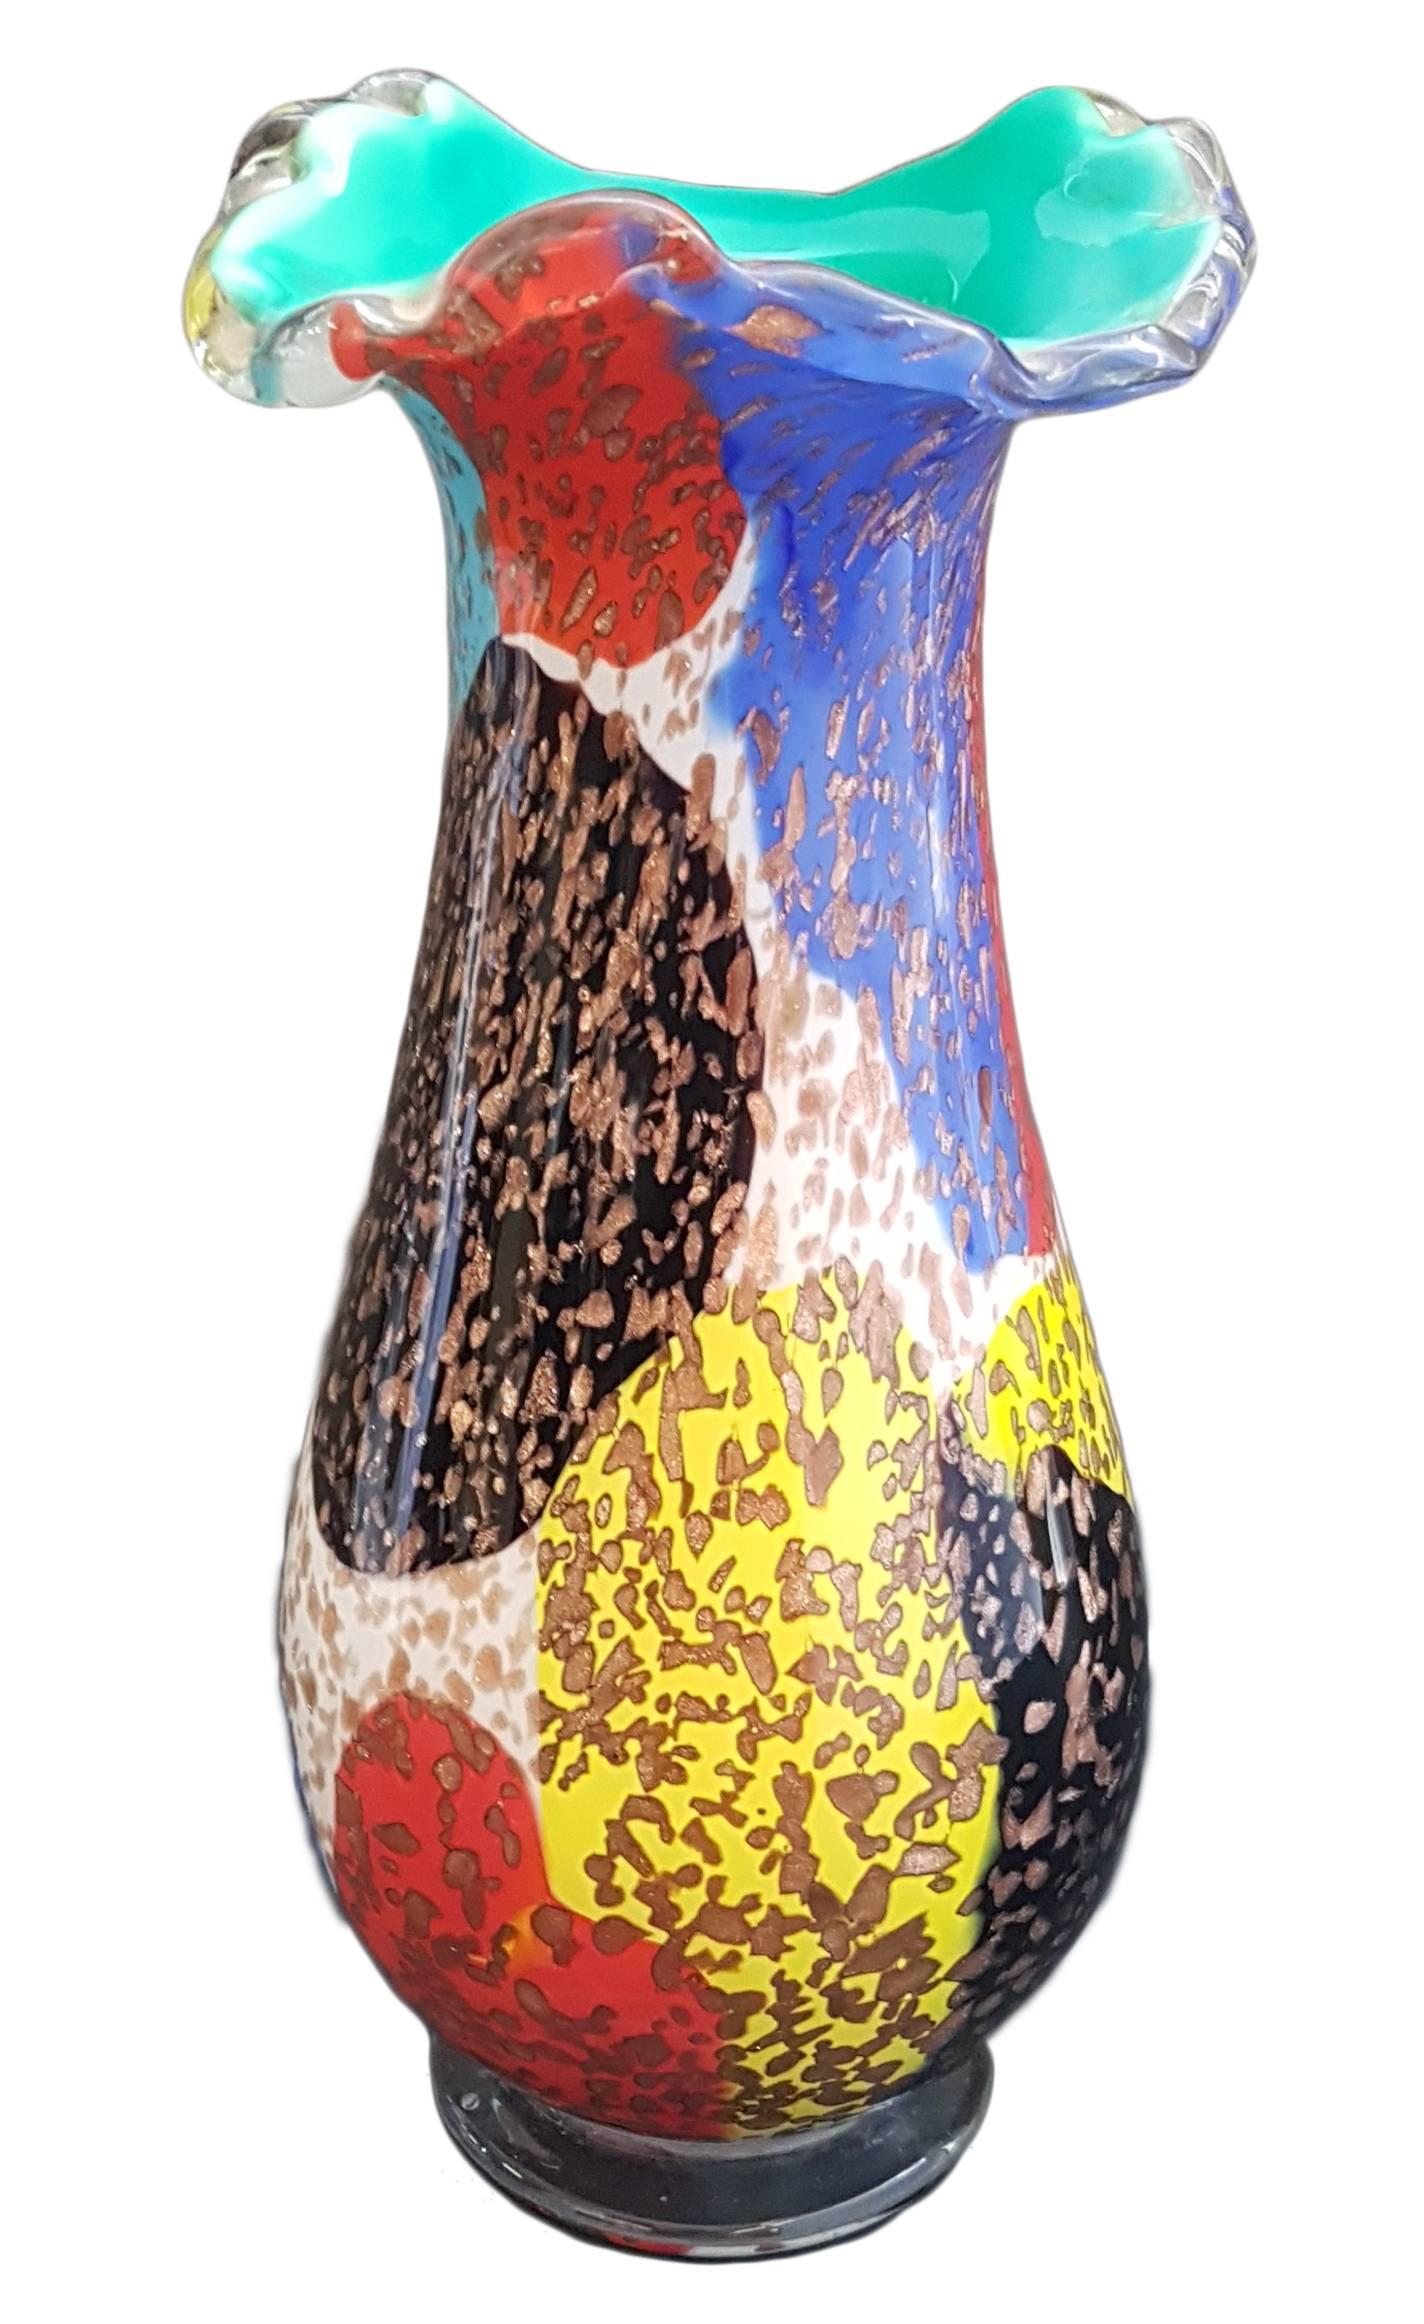 A colourful blown glass vase with aventurine stone by A.Ve.M (Arte Vetraria Muranese), Italy. 
Aventurine is a variety of quartz characterized by bright inclusions of mica or other minerals that give a shimmering or glistening effect to the stone